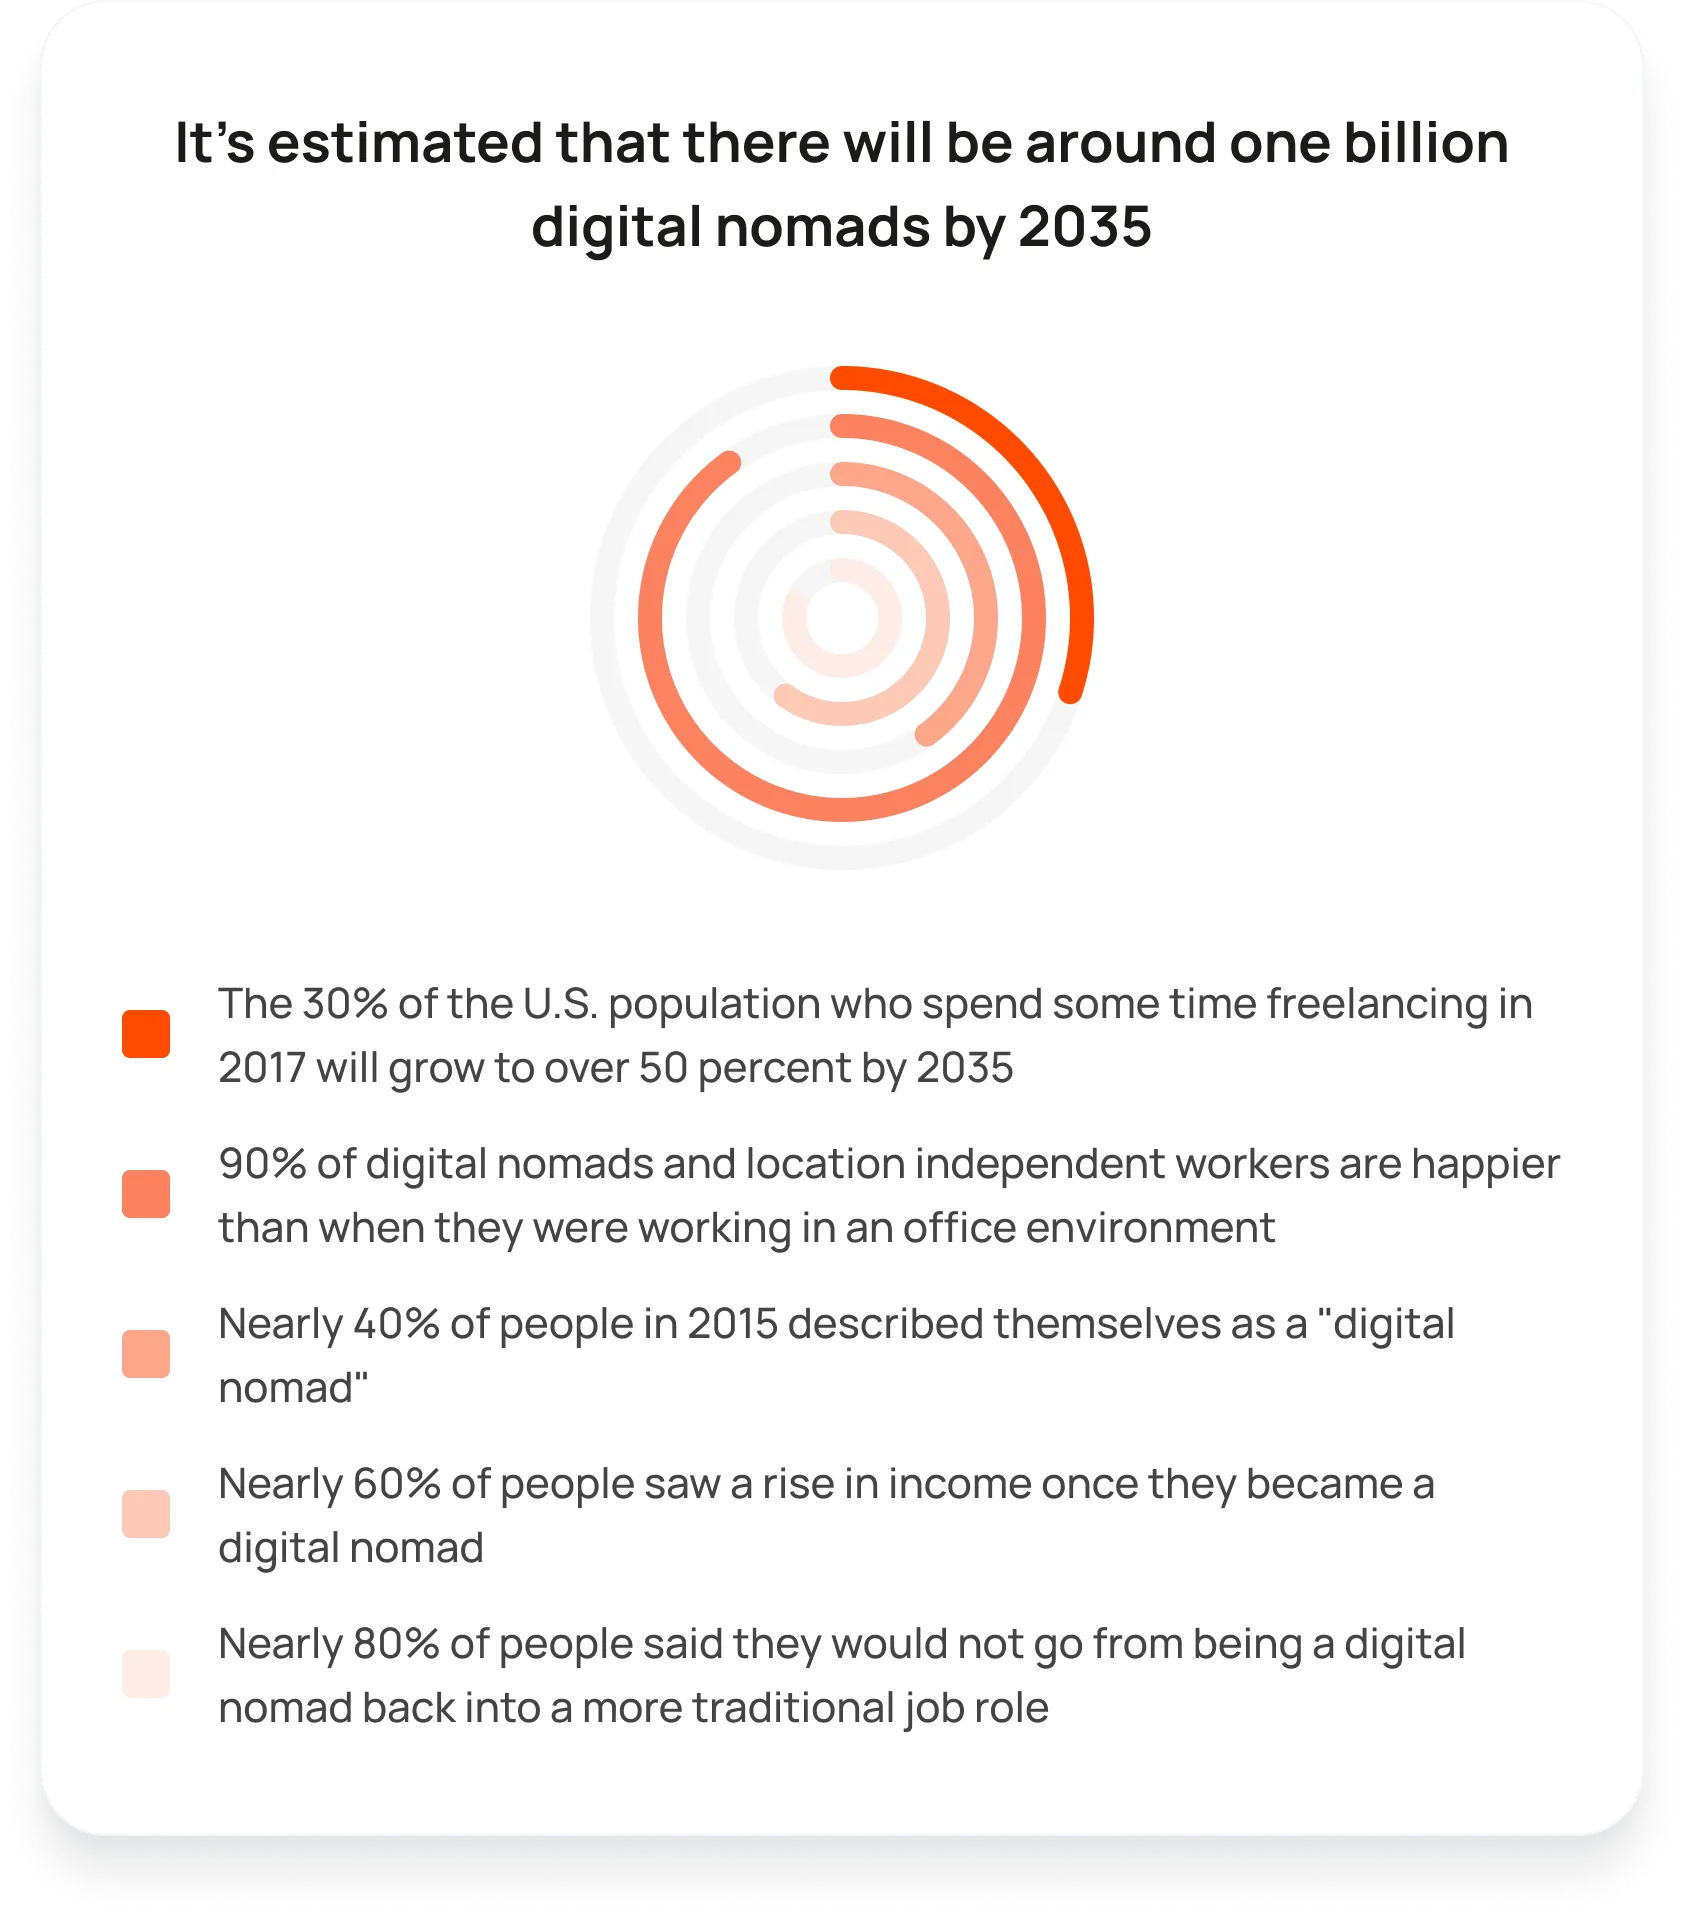 It's estimated that there will be around one billion digital nomads by 2035